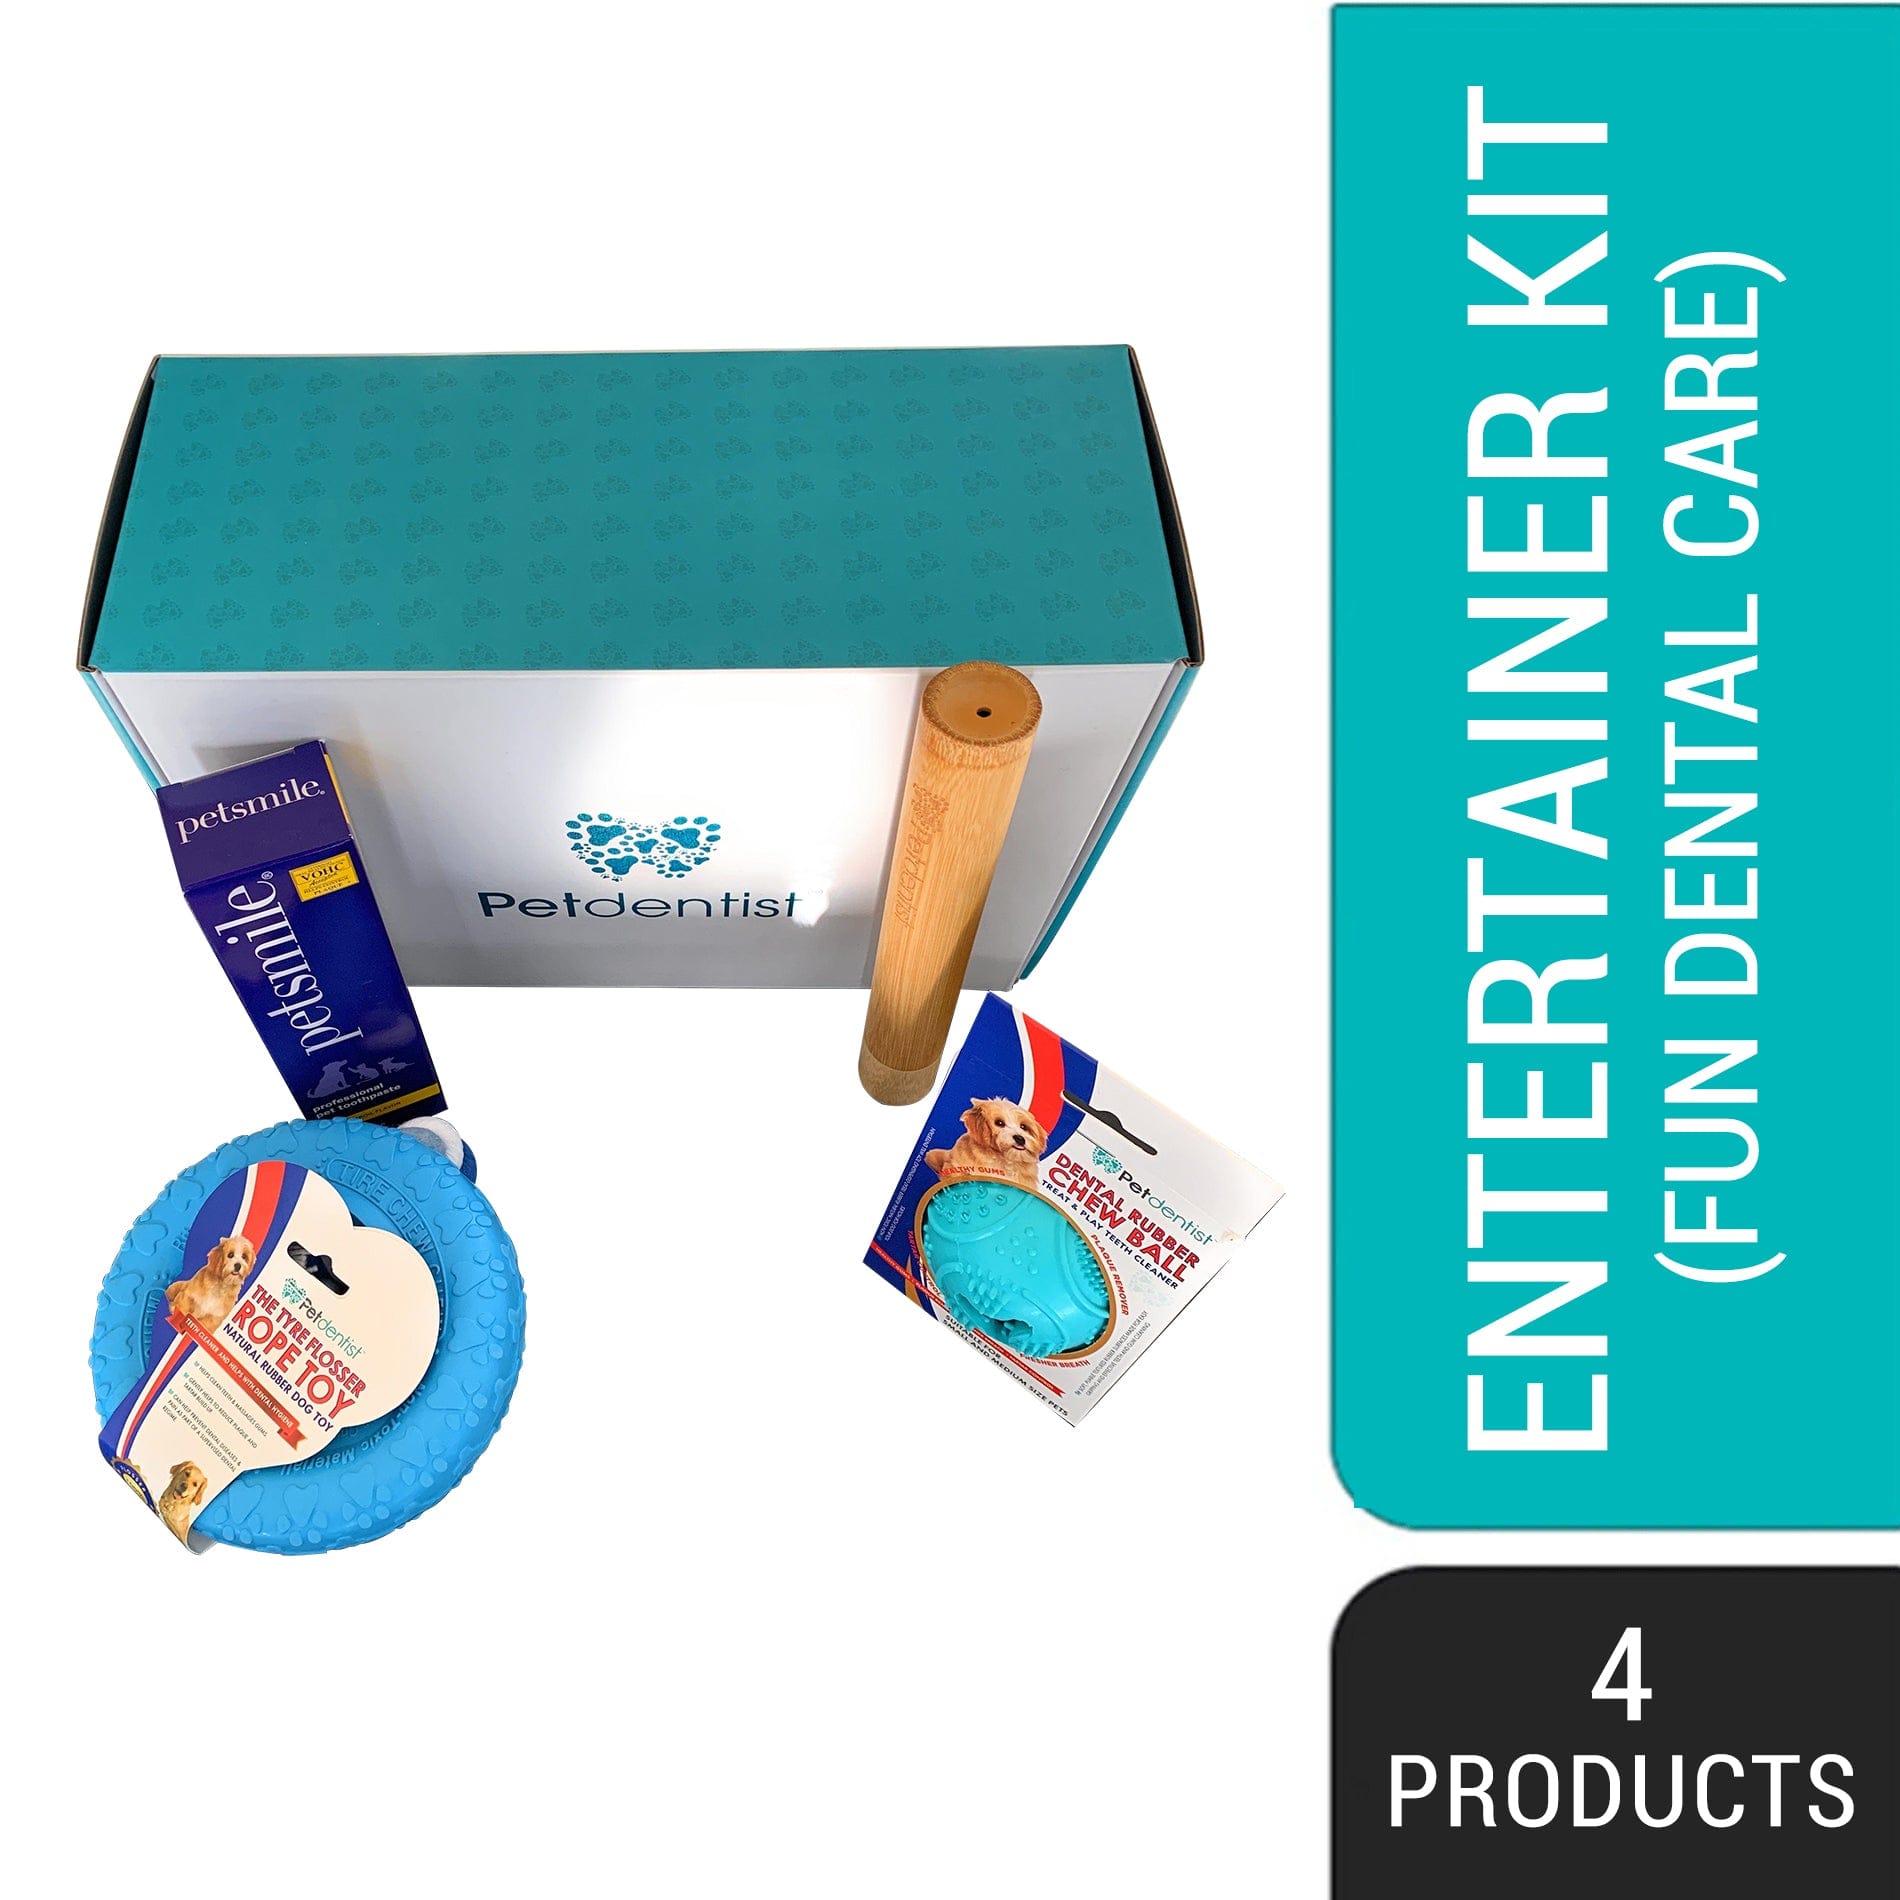 Petdentist® Pet Oral Care Supplies Petdentist®-THE ENTERTAINER Teeth Cleaning Kit Hamper Gift Set Box